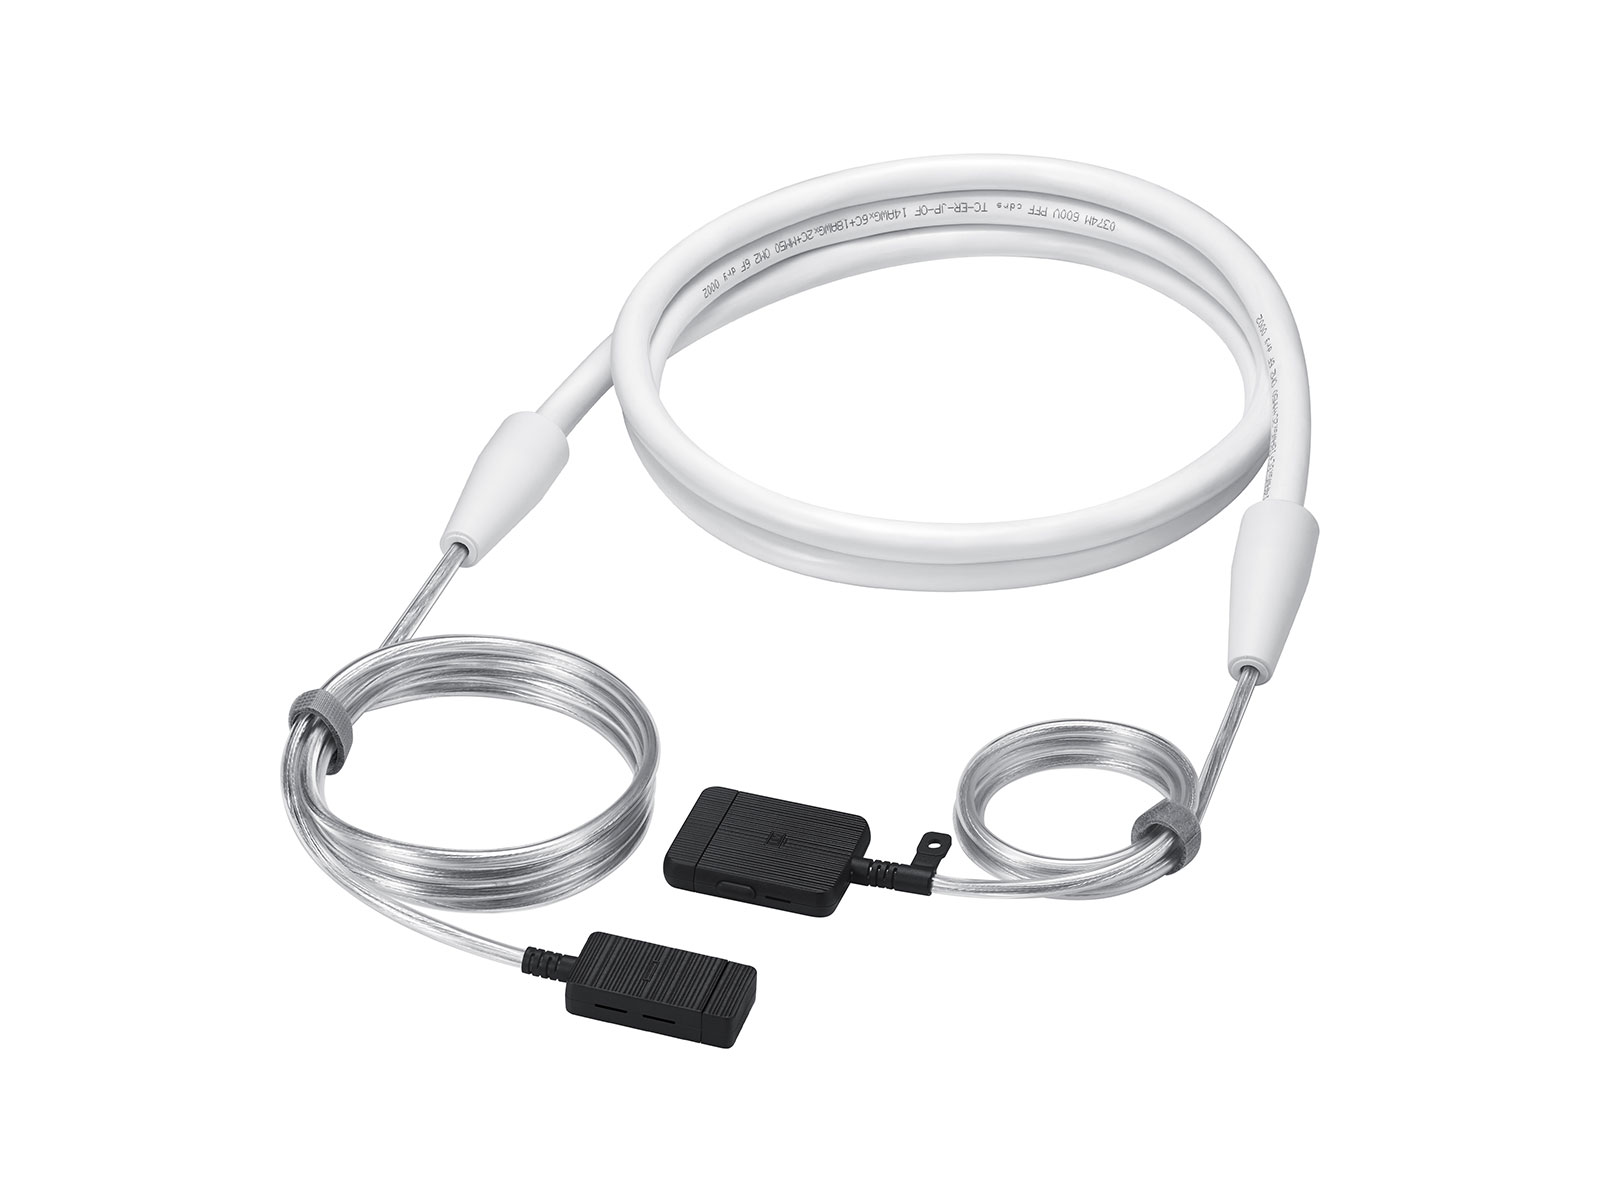 https://image-us.samsung.com/SamsungUS/home/televisions-and-home-theater/television-and-home-theater-accessories/pdp/vg-socr86u-za/gallery/Gallery-Image-1-Cable.jpg?$product-details-jpg$